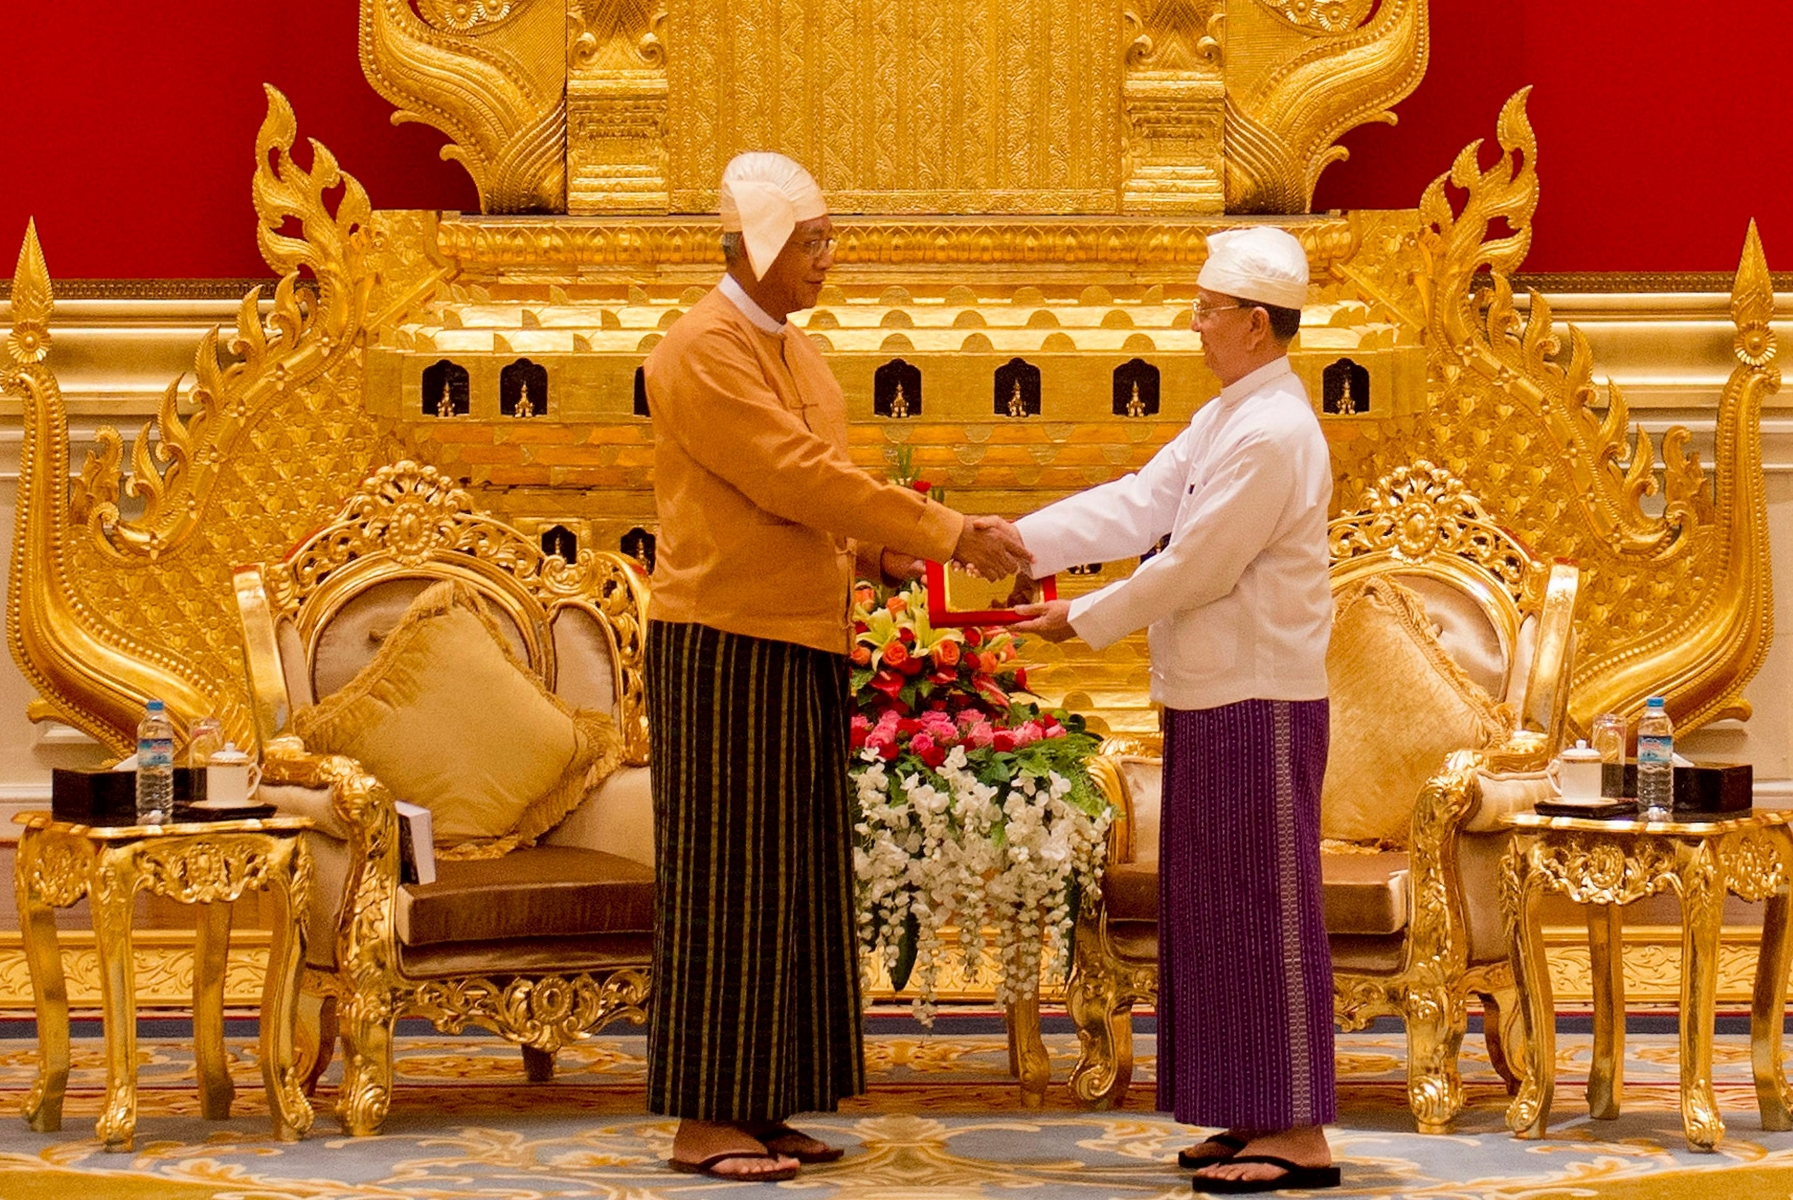 epa05235793 Myanmar's newly sworn-in President Htin Kyaw (L) receives the presidential seal from outgoing President Thein Sein (R) during the official handover ceremony at the presidential palace in Naypyitaw, Myanmar, 30 March 2016. New president Htin Kyaw was sworn in on 30 March as the first elected civilian president in more than 50 years. Htin Kyaw, 69, from the National League for Democracy (NLD), was elected this month by the legislature. The NLD gained an absolute majority with a landslide win in elections last November. The new president will rule as a confidant of Suu Kyi, who is not qualified for the presidency because of a rule in the Constitution adopted by the military junta, which vetoes candidates with foreign families.  EPA/YE AUNG THU / POOL MYANMAR POLITICS